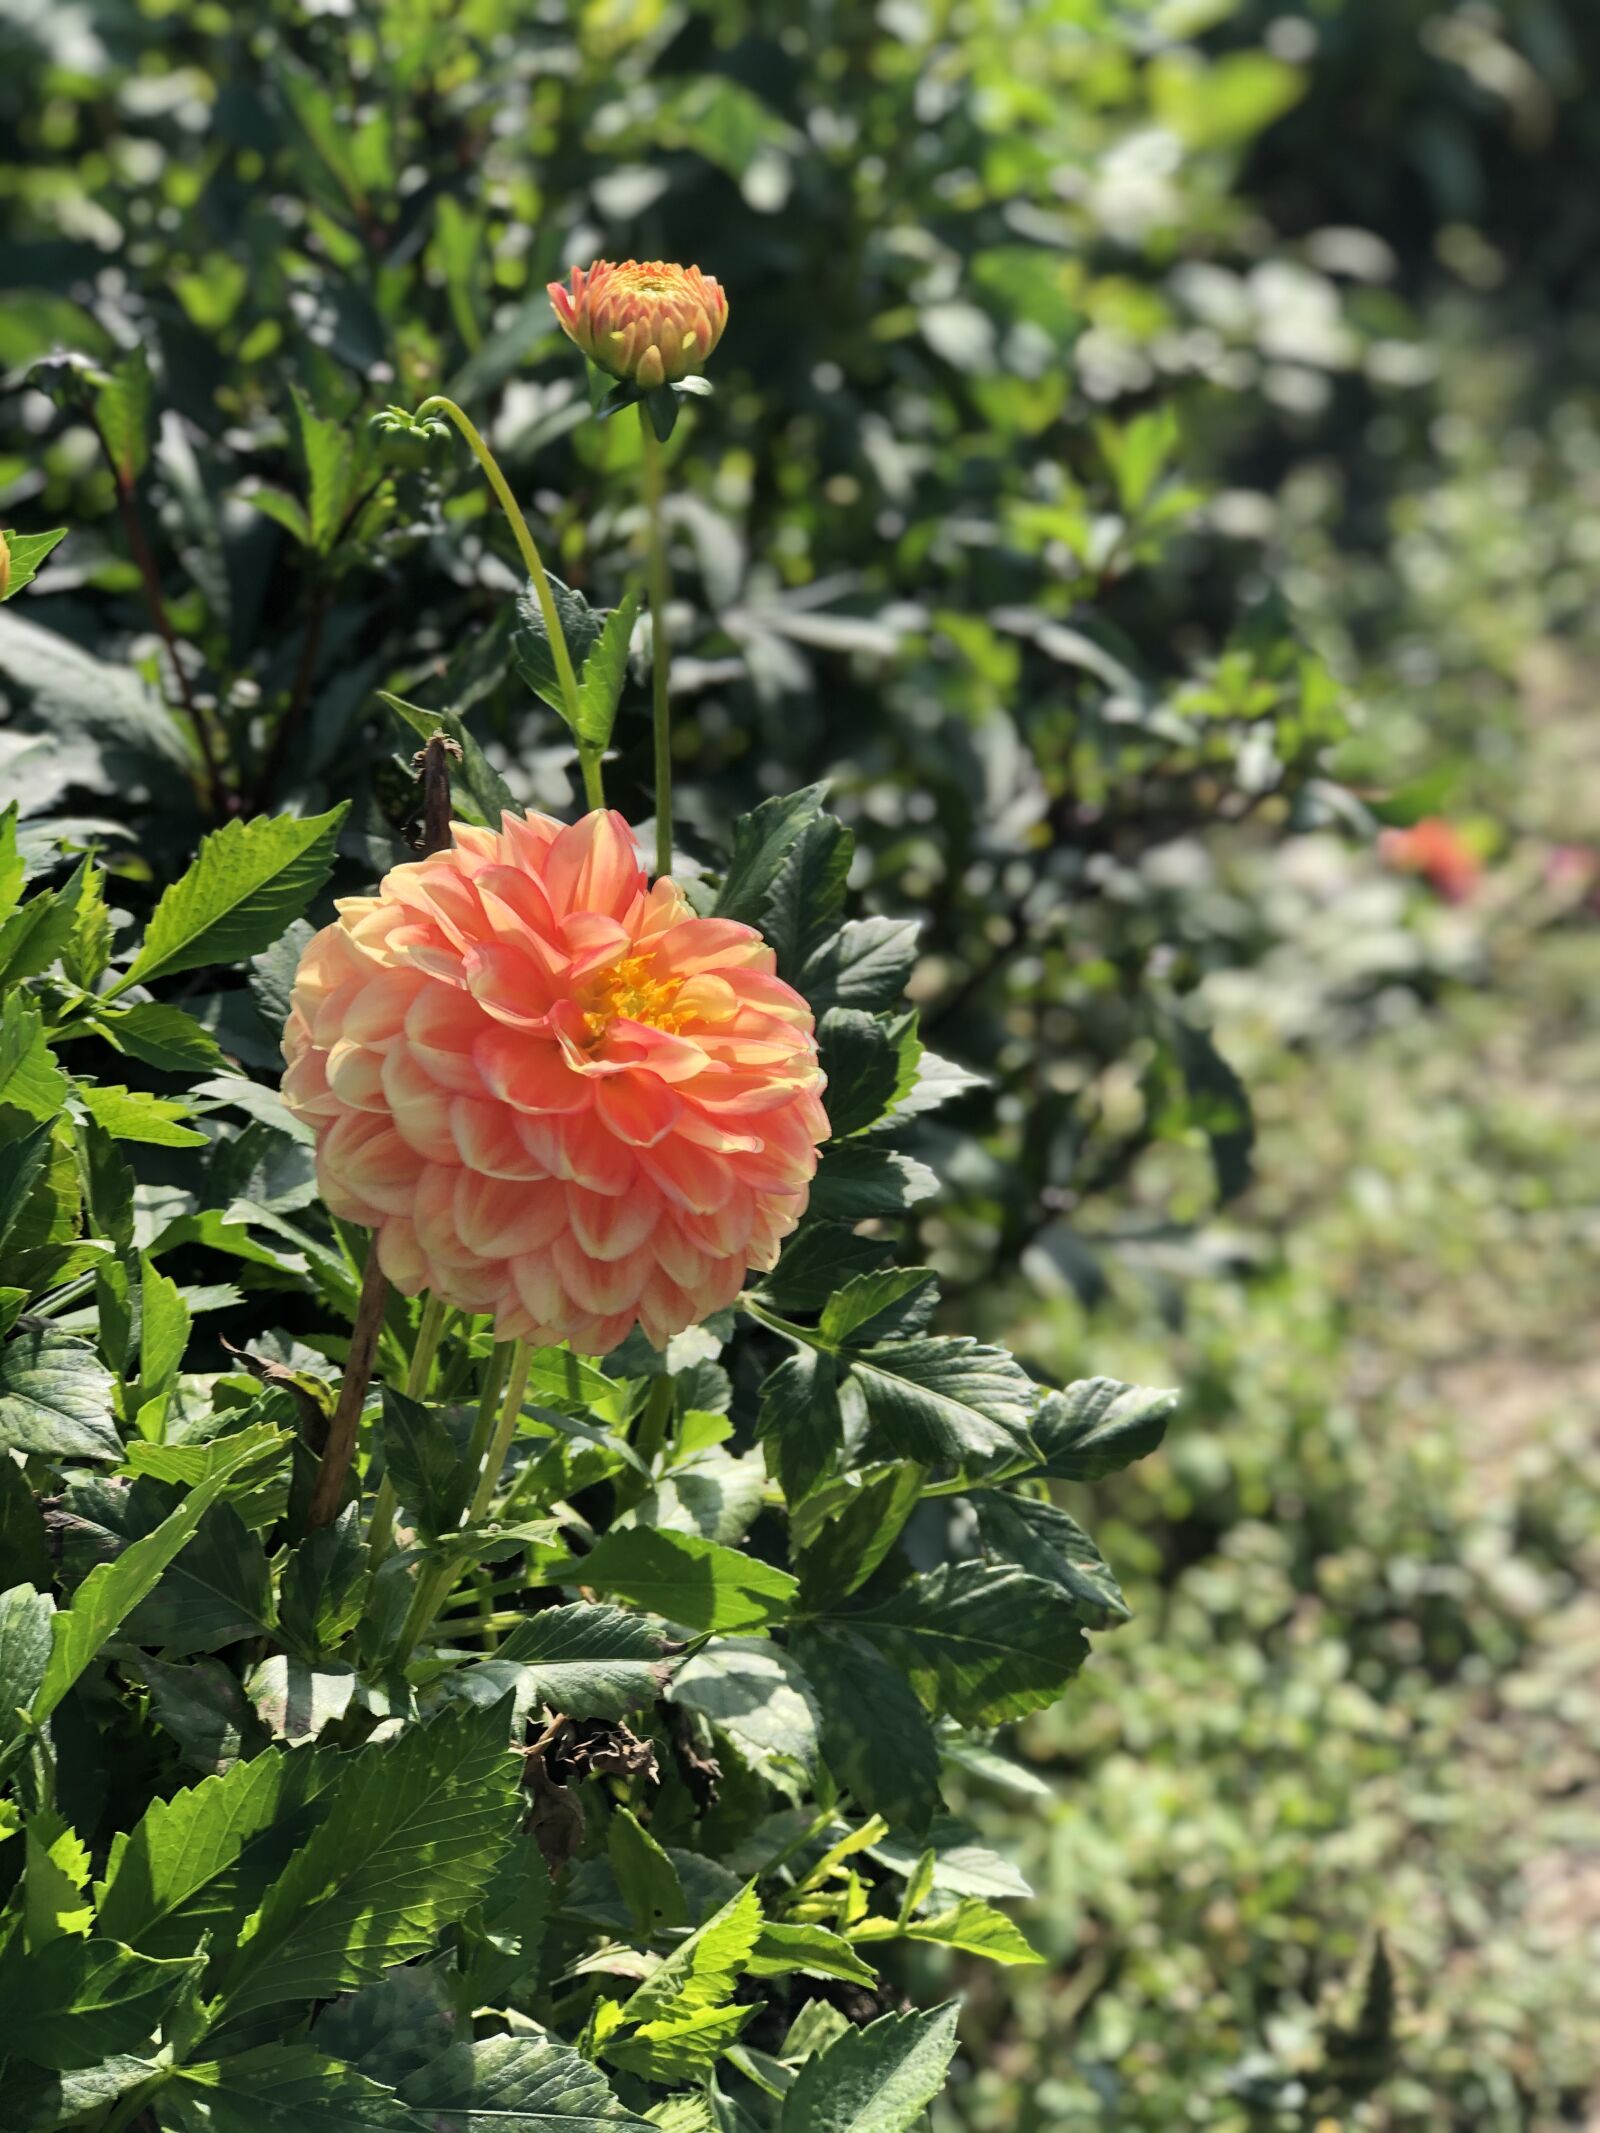 iPhone 8 Plus back dual camera 6.6mm f/2.8 sample photo. Flowers, flower, summer photography